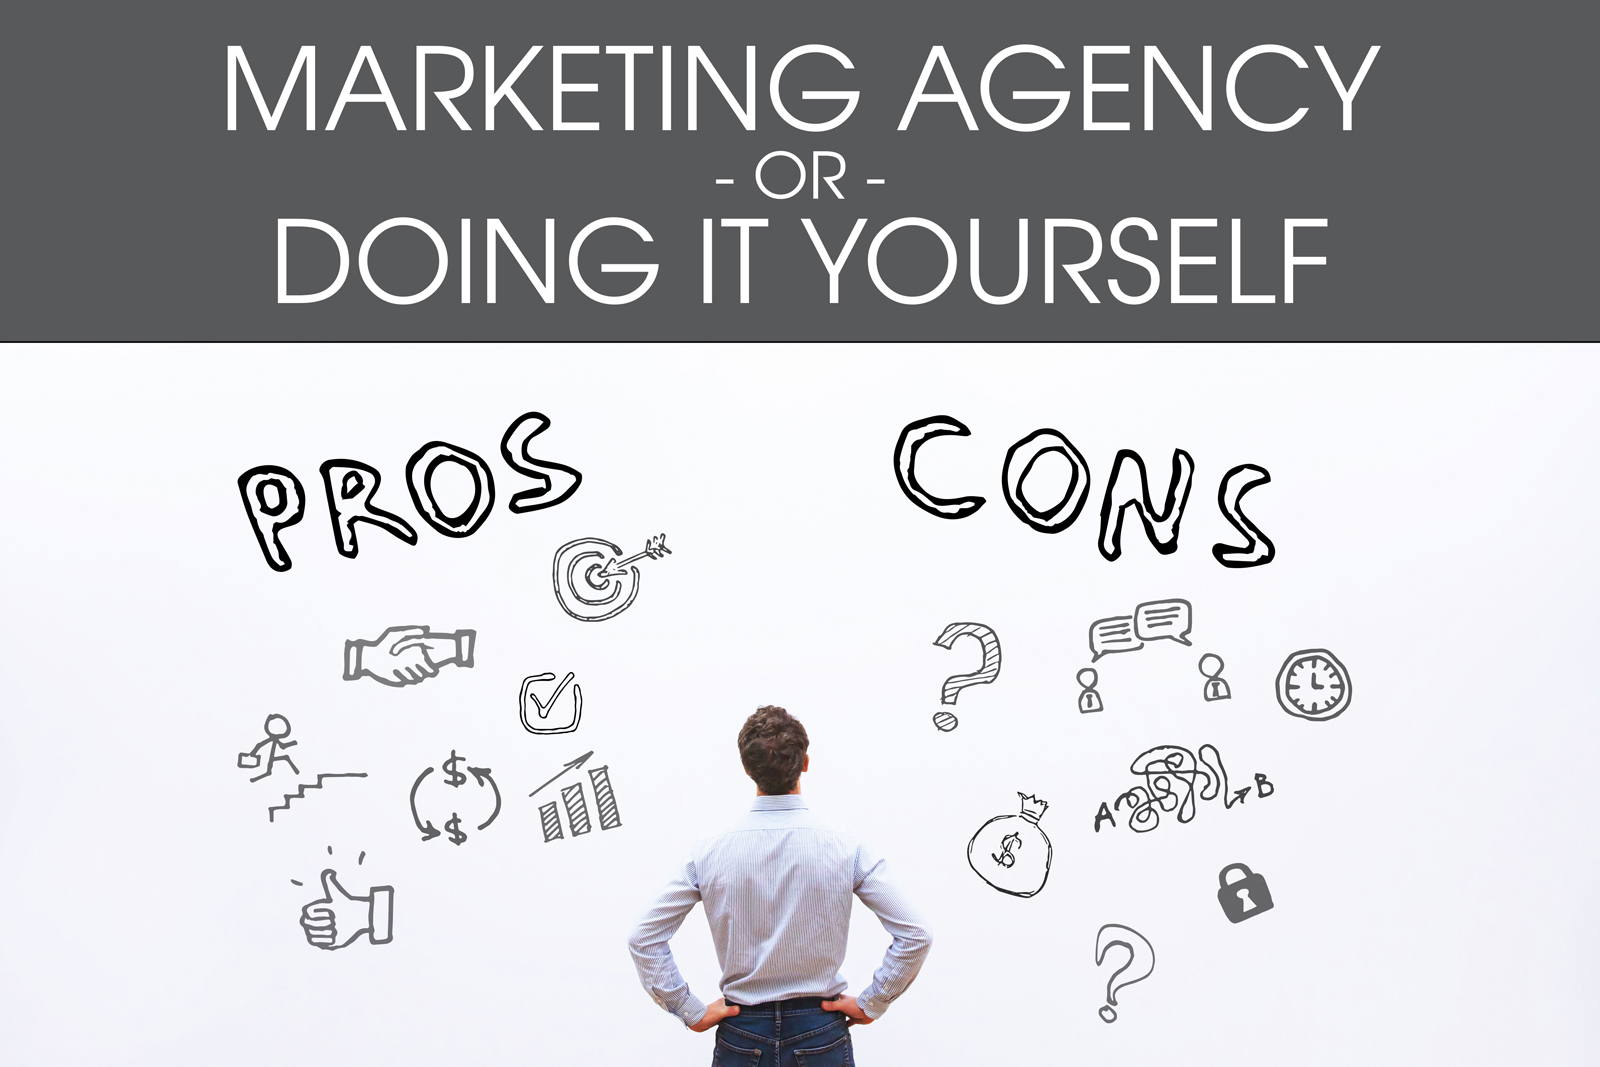 Hiring Marketing Agency Or Doing It Yourself [Pros & Cons Infographic]